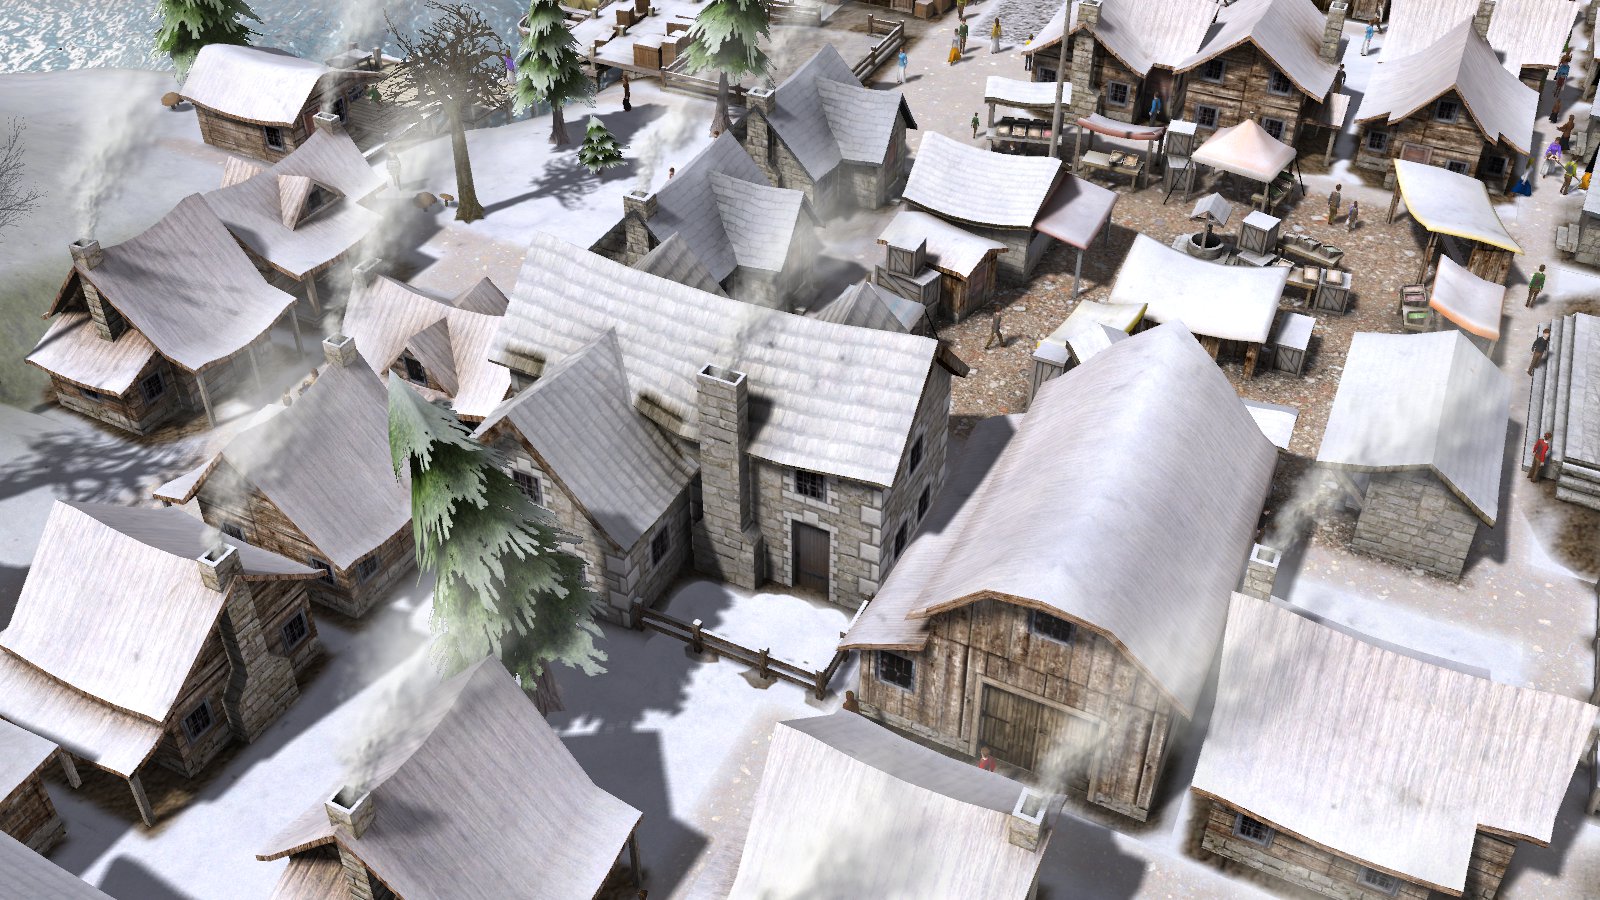 Banished, City, Build, Game, Winter, Snow, Strategy, Simulation